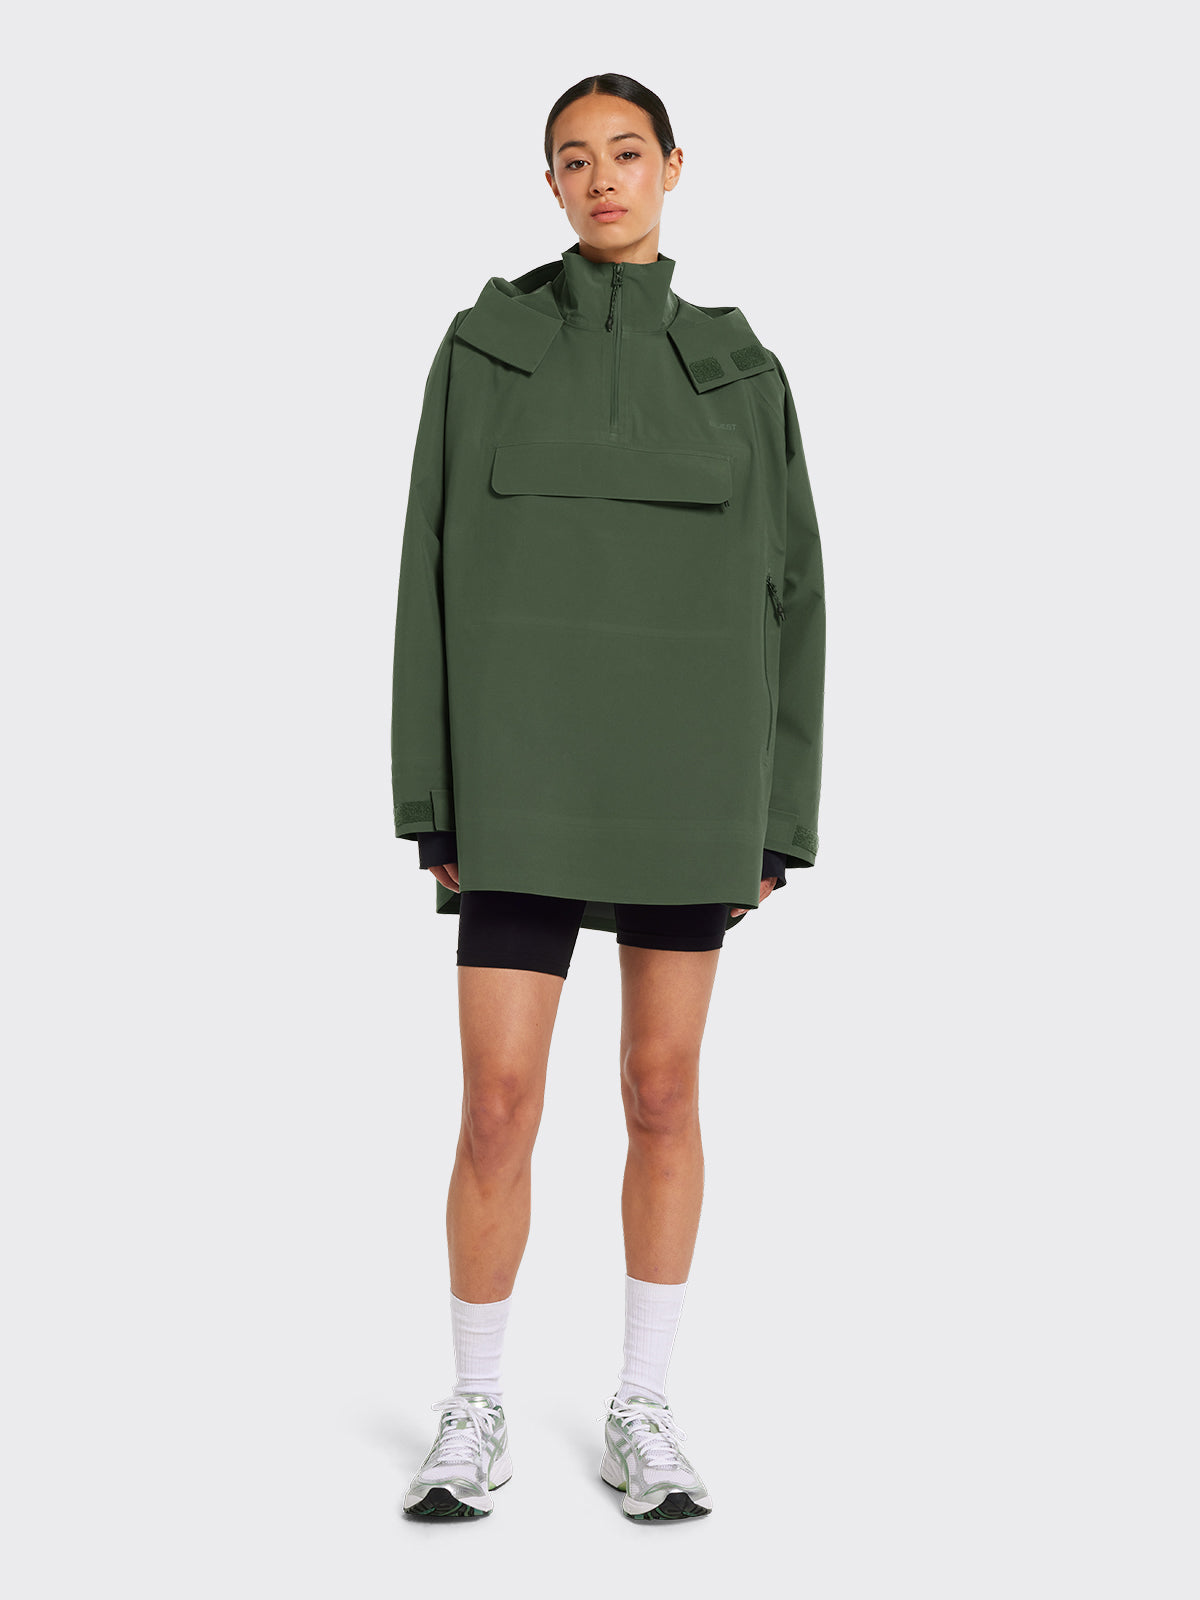 Woman wearing Voss poncho in Dusty Green from Blæst